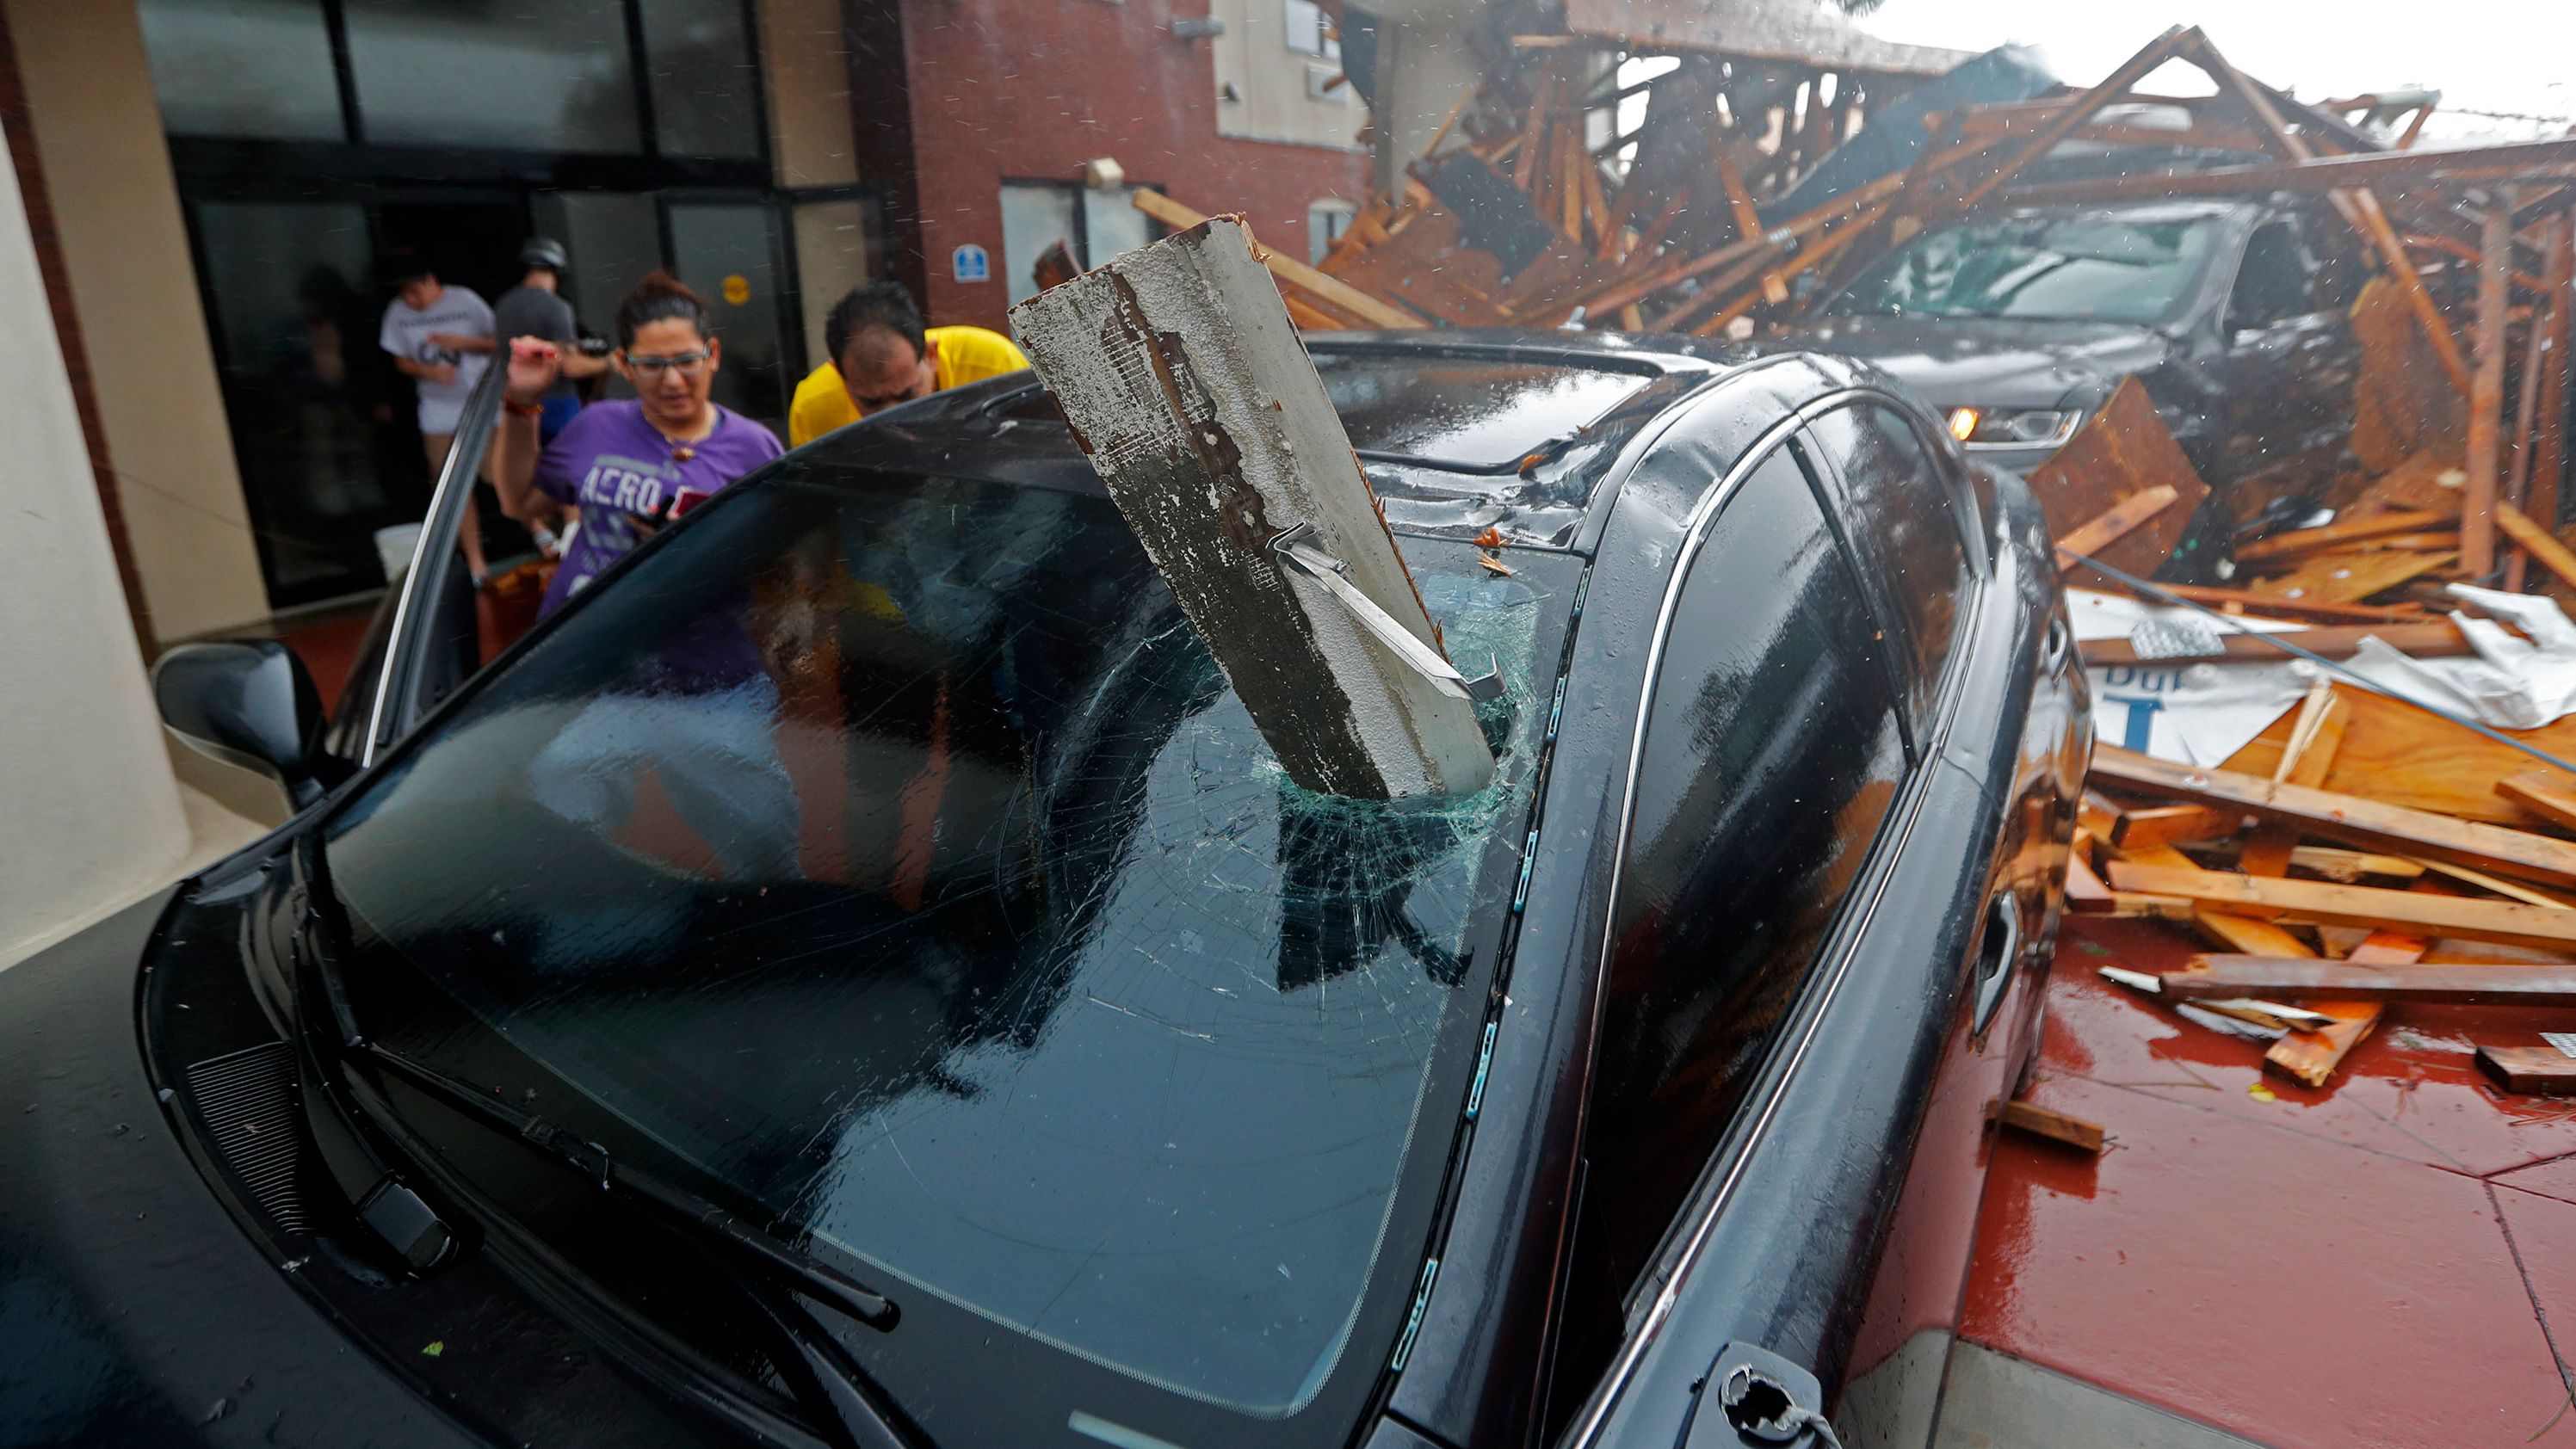 A woman checks on her vehicle after a hotel canopy collapsed in Panama City Beach.